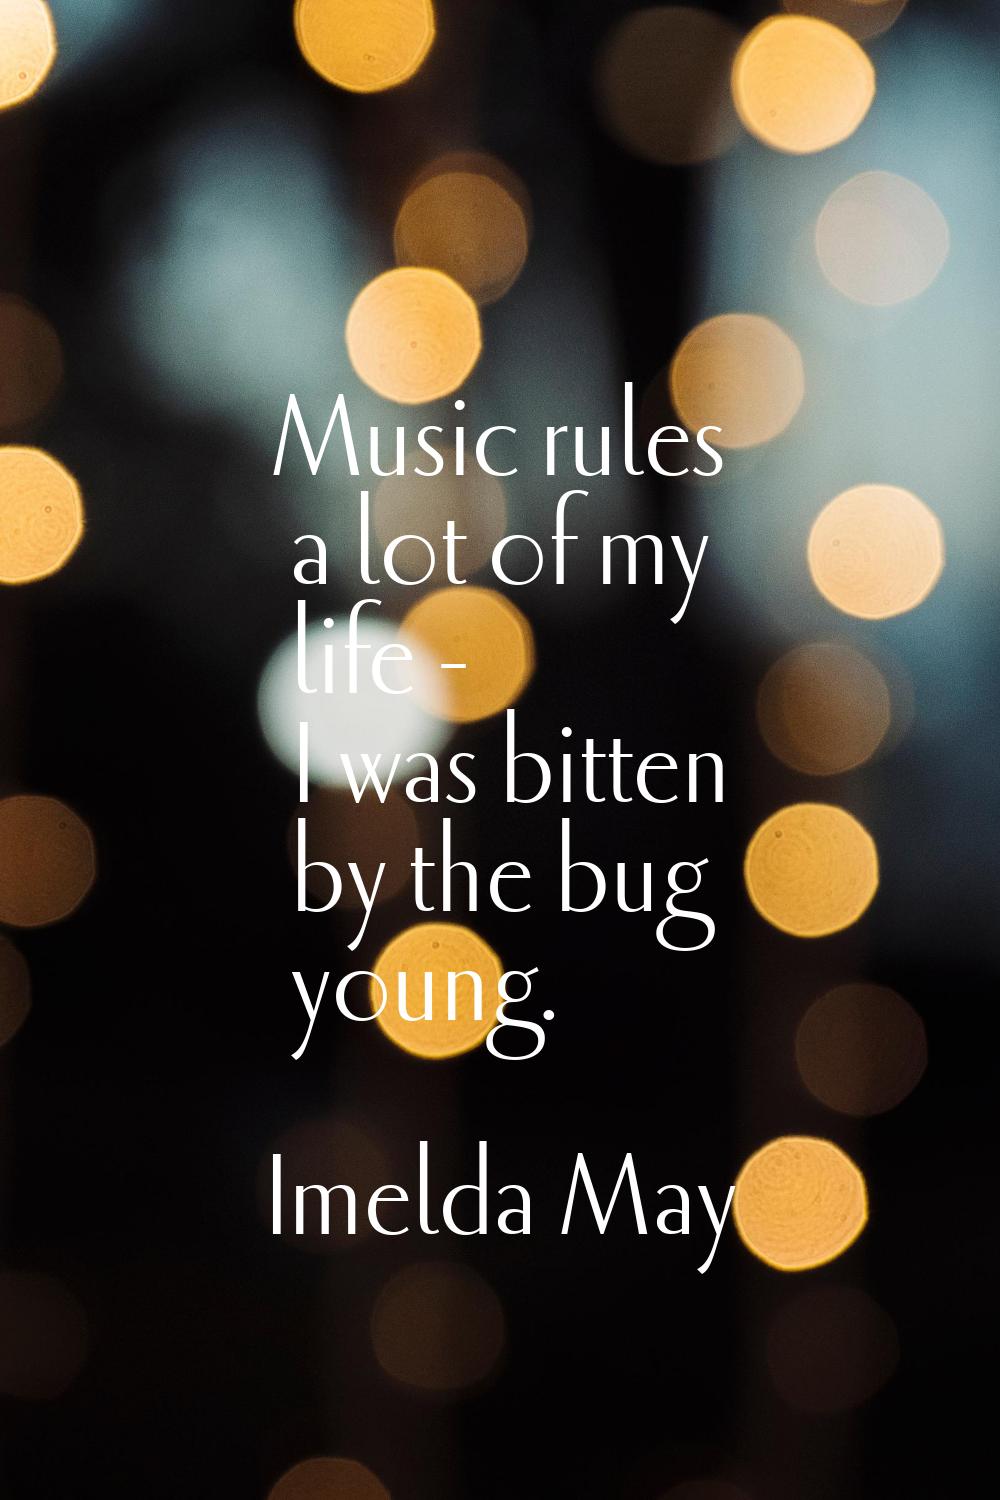 Music rules a lot of my life - I was bitten by the bug young.